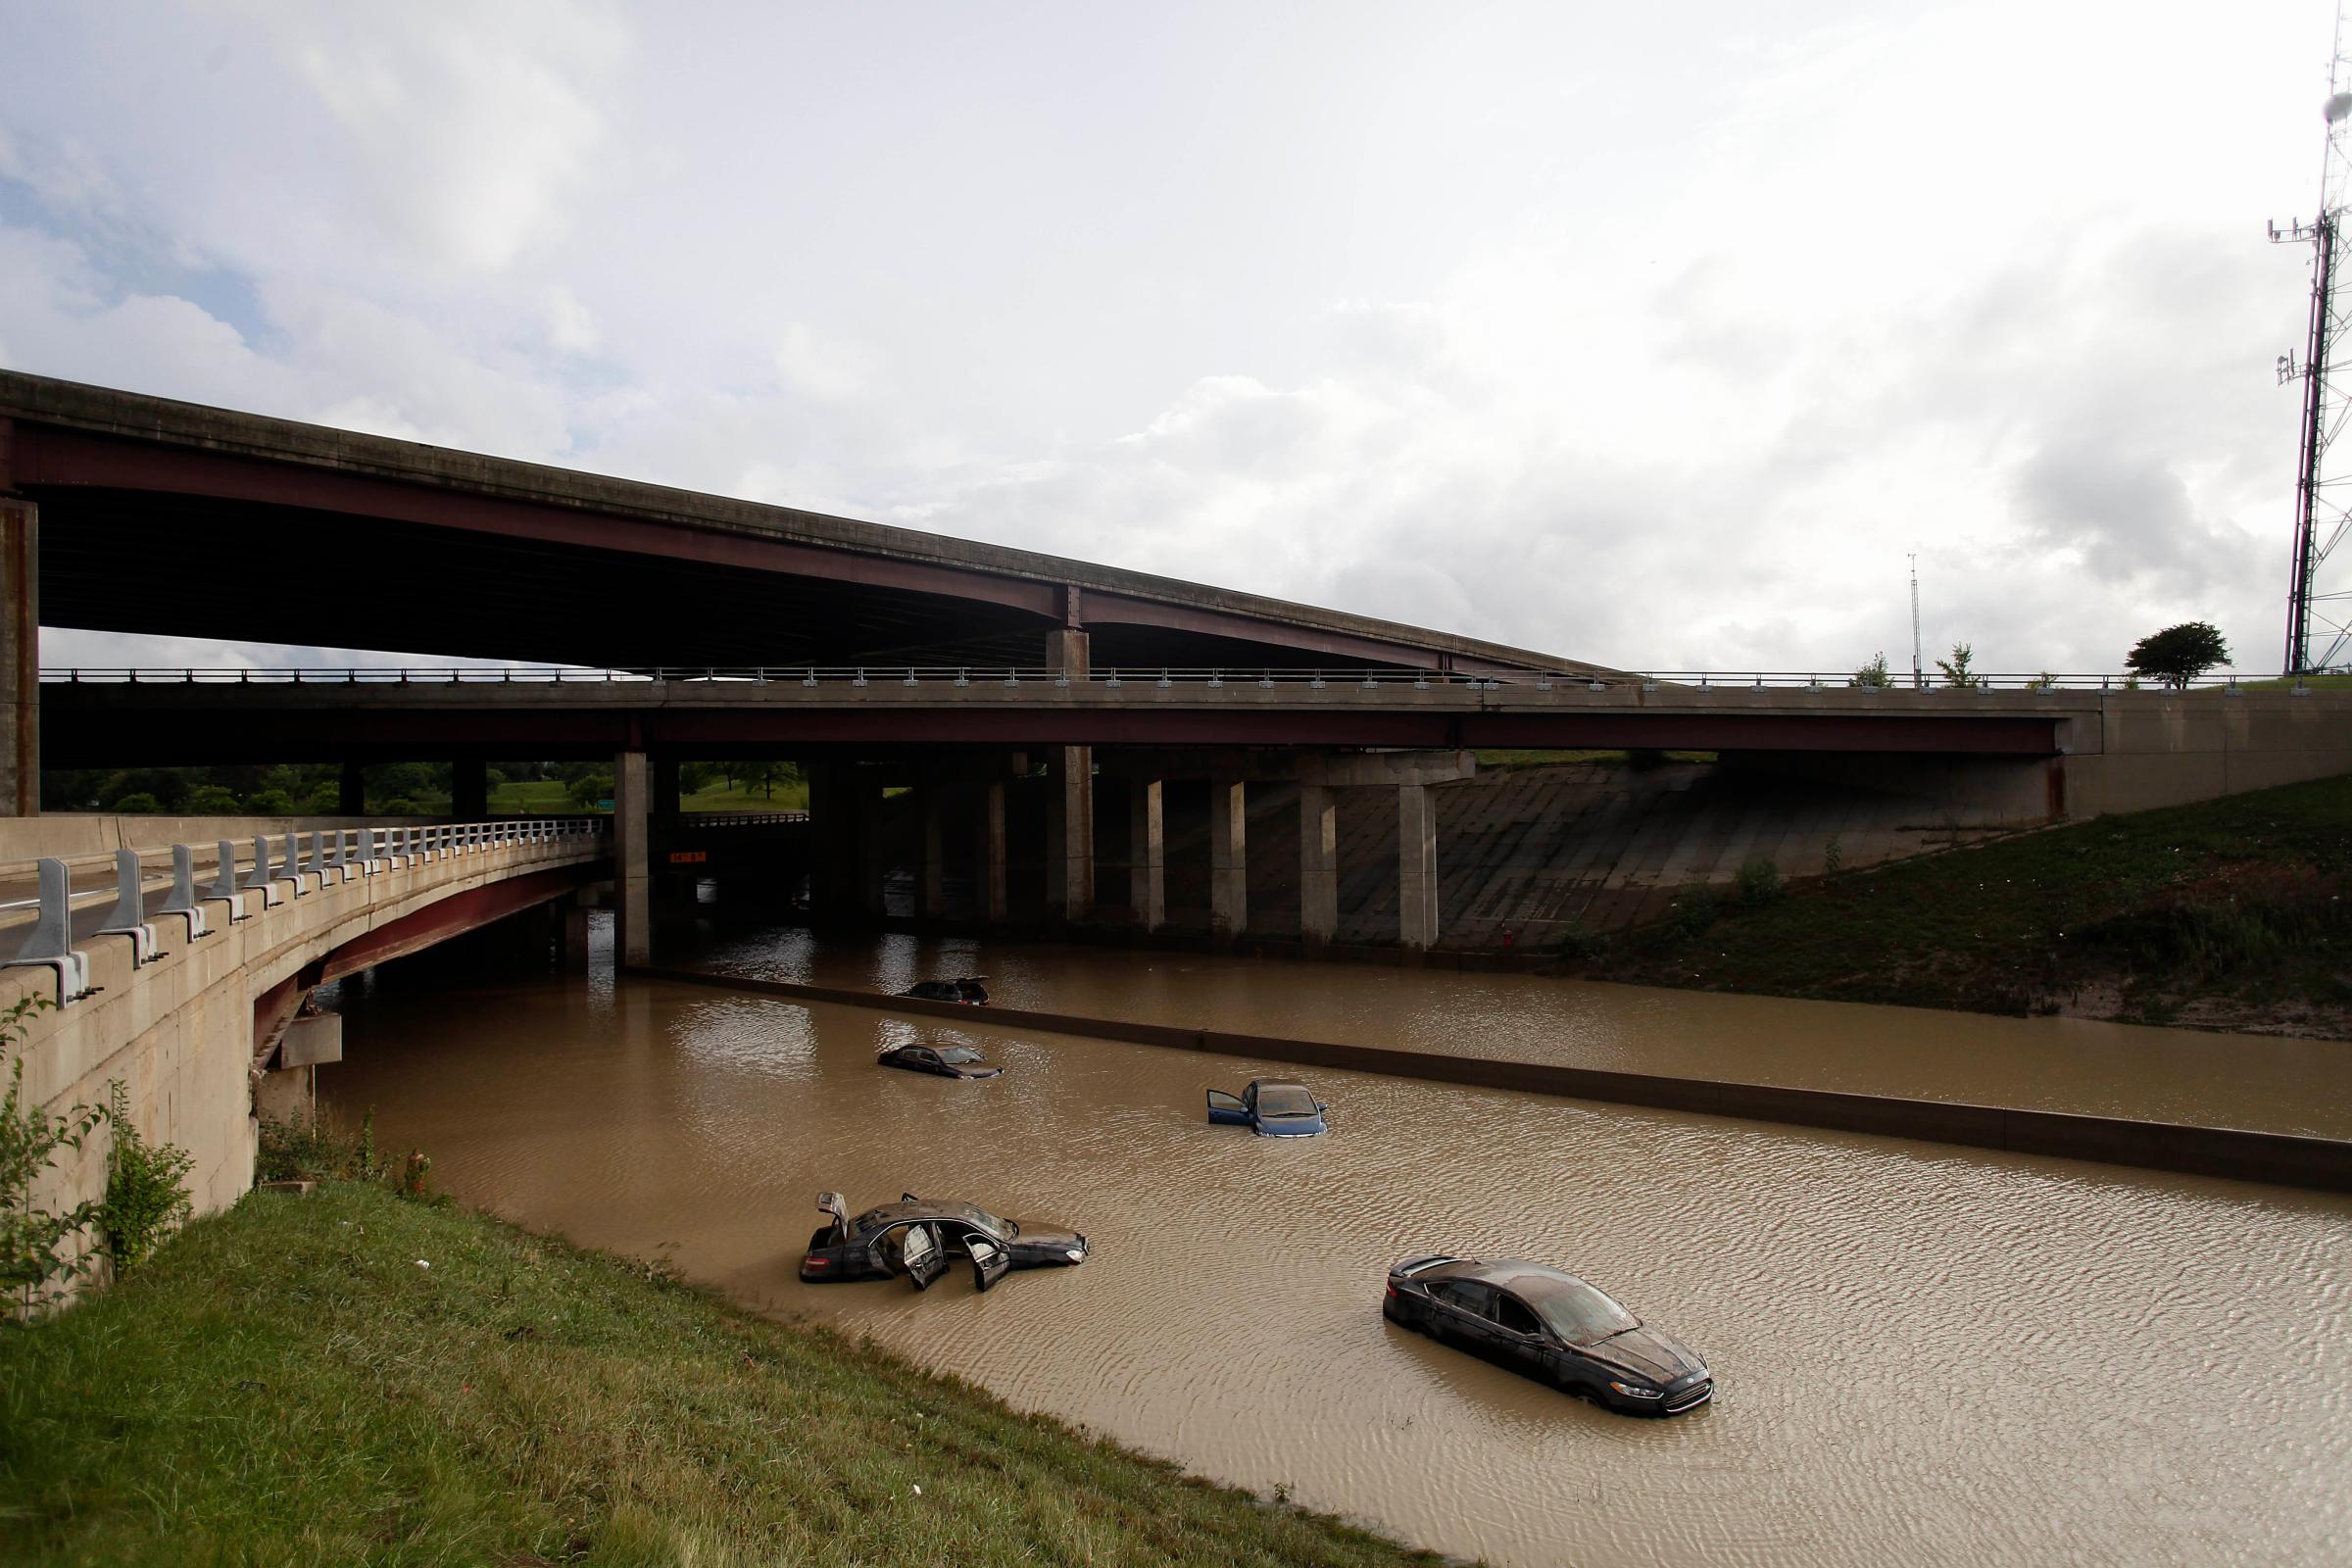 Aug.t 12, 2014. Vehicles sit submerged in water along I-75, in Royal Oak, Michigan.